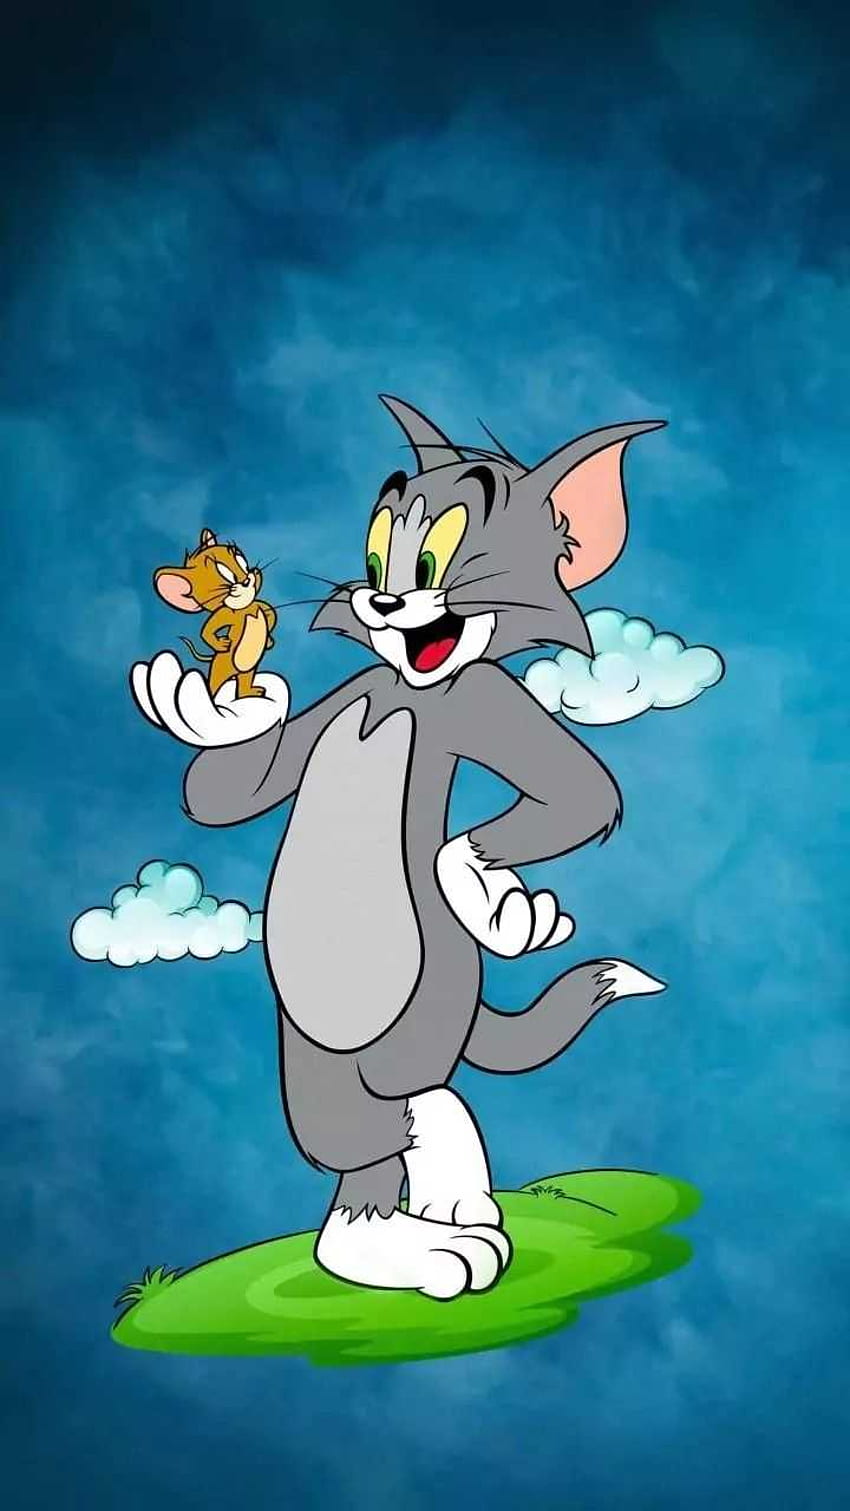 iPhone Tom and Jerry - Awesome, Tom and Jerry Movie HD phone wallpaper